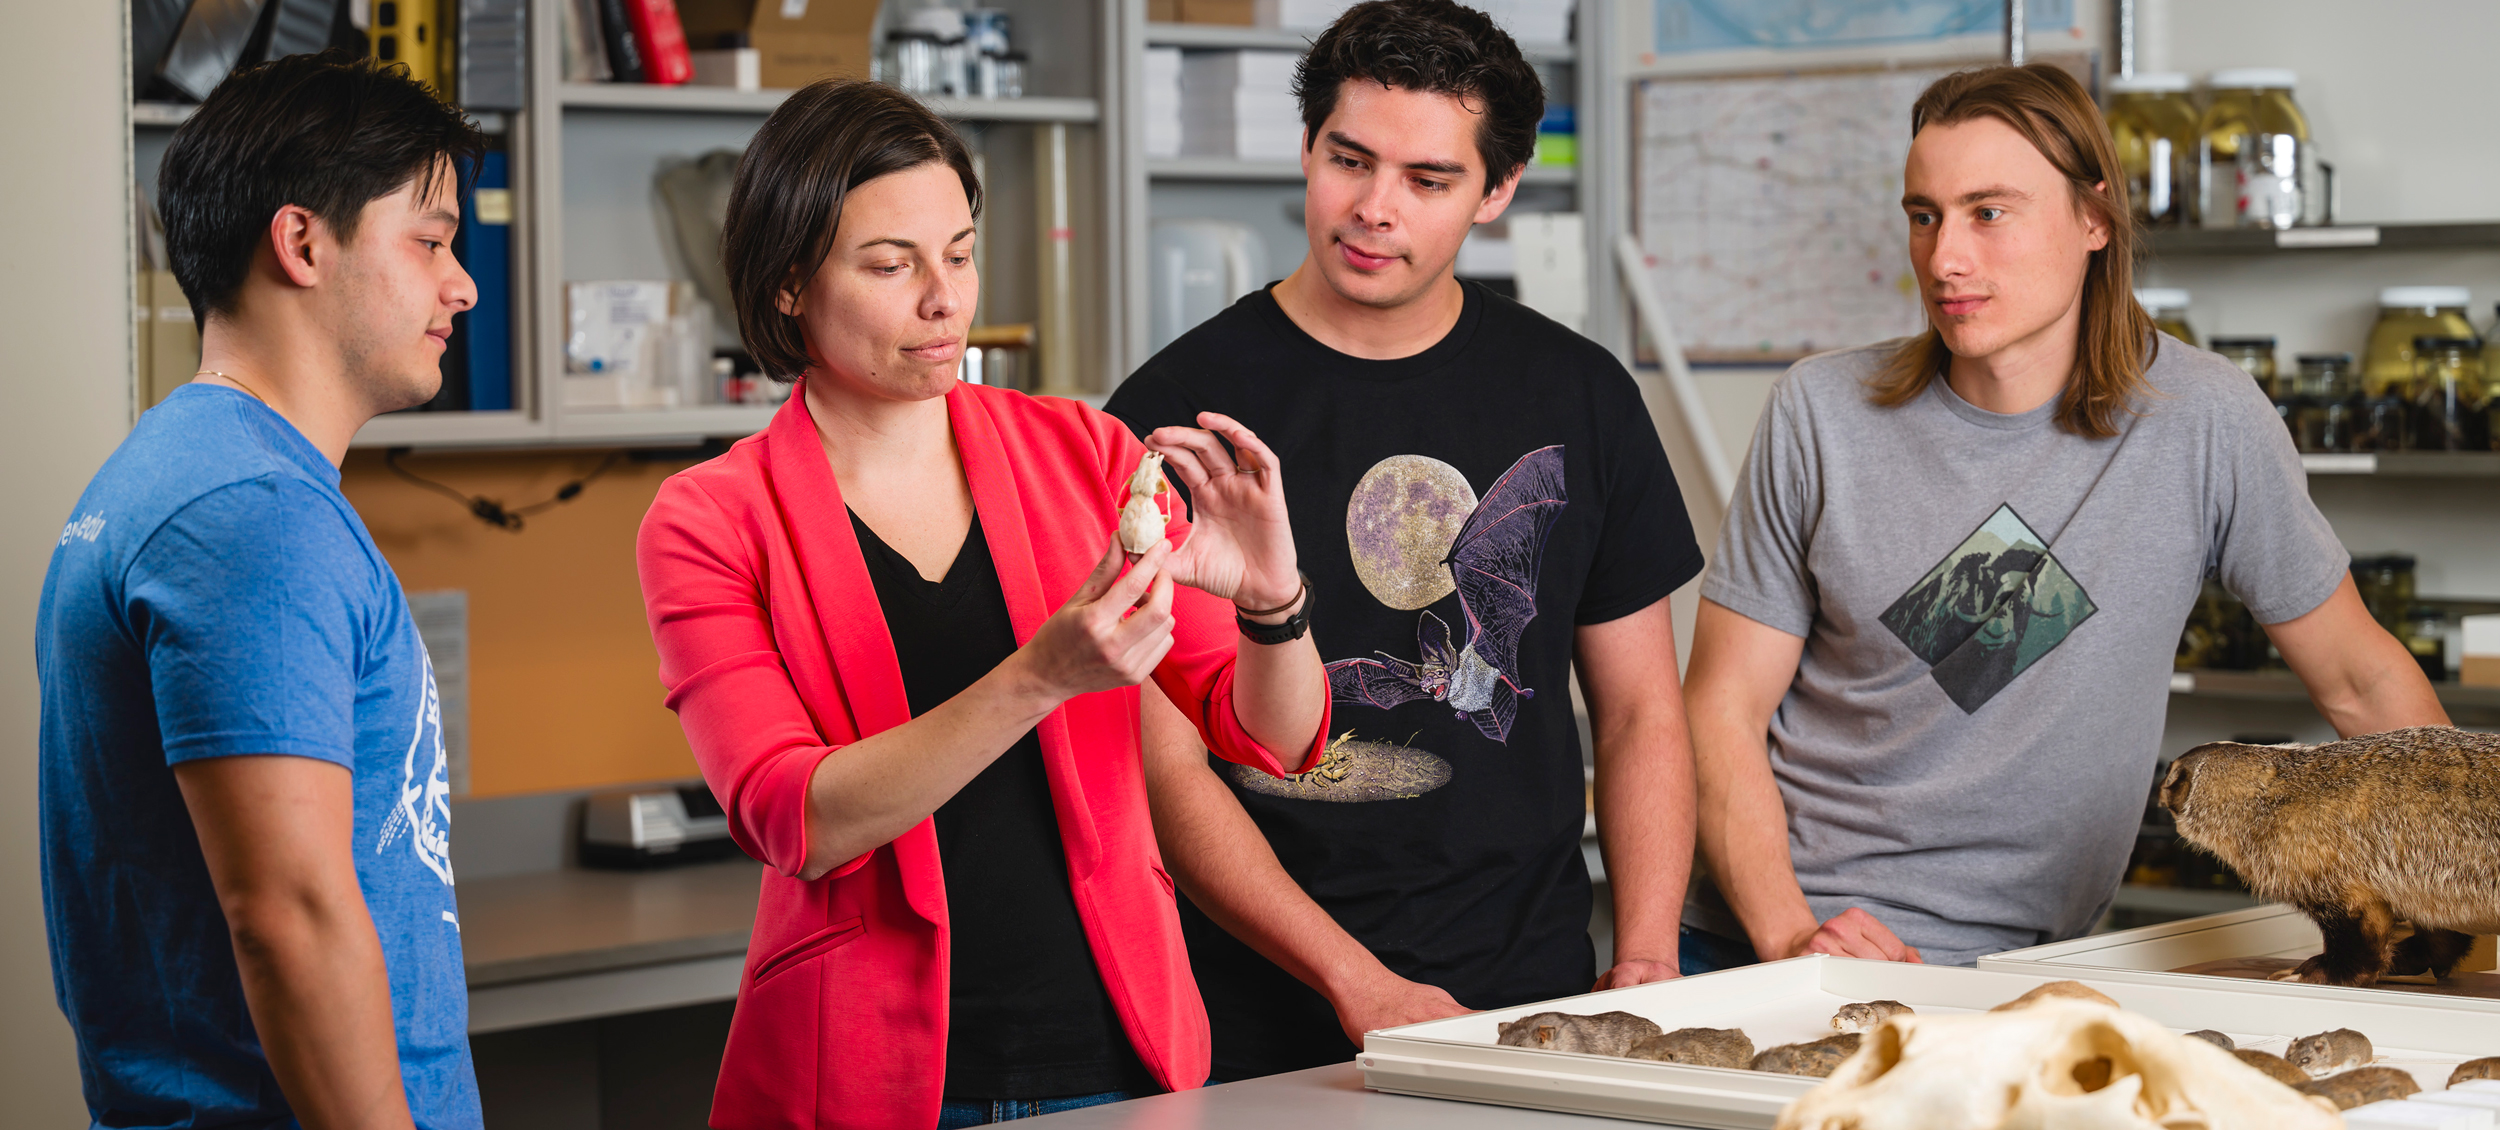 ""KUG38-Spring20234-f-hubofdiscovery-banner SPECIMEN DISCUSSION: Robert W. and Geraldine Wilson Assistant Professor Jocelyn Colella shows student researchers (from left) Alex Hey, Daniel Ibañez IV and Ben Wiens what types of information the skull of a small mammal can reveal.